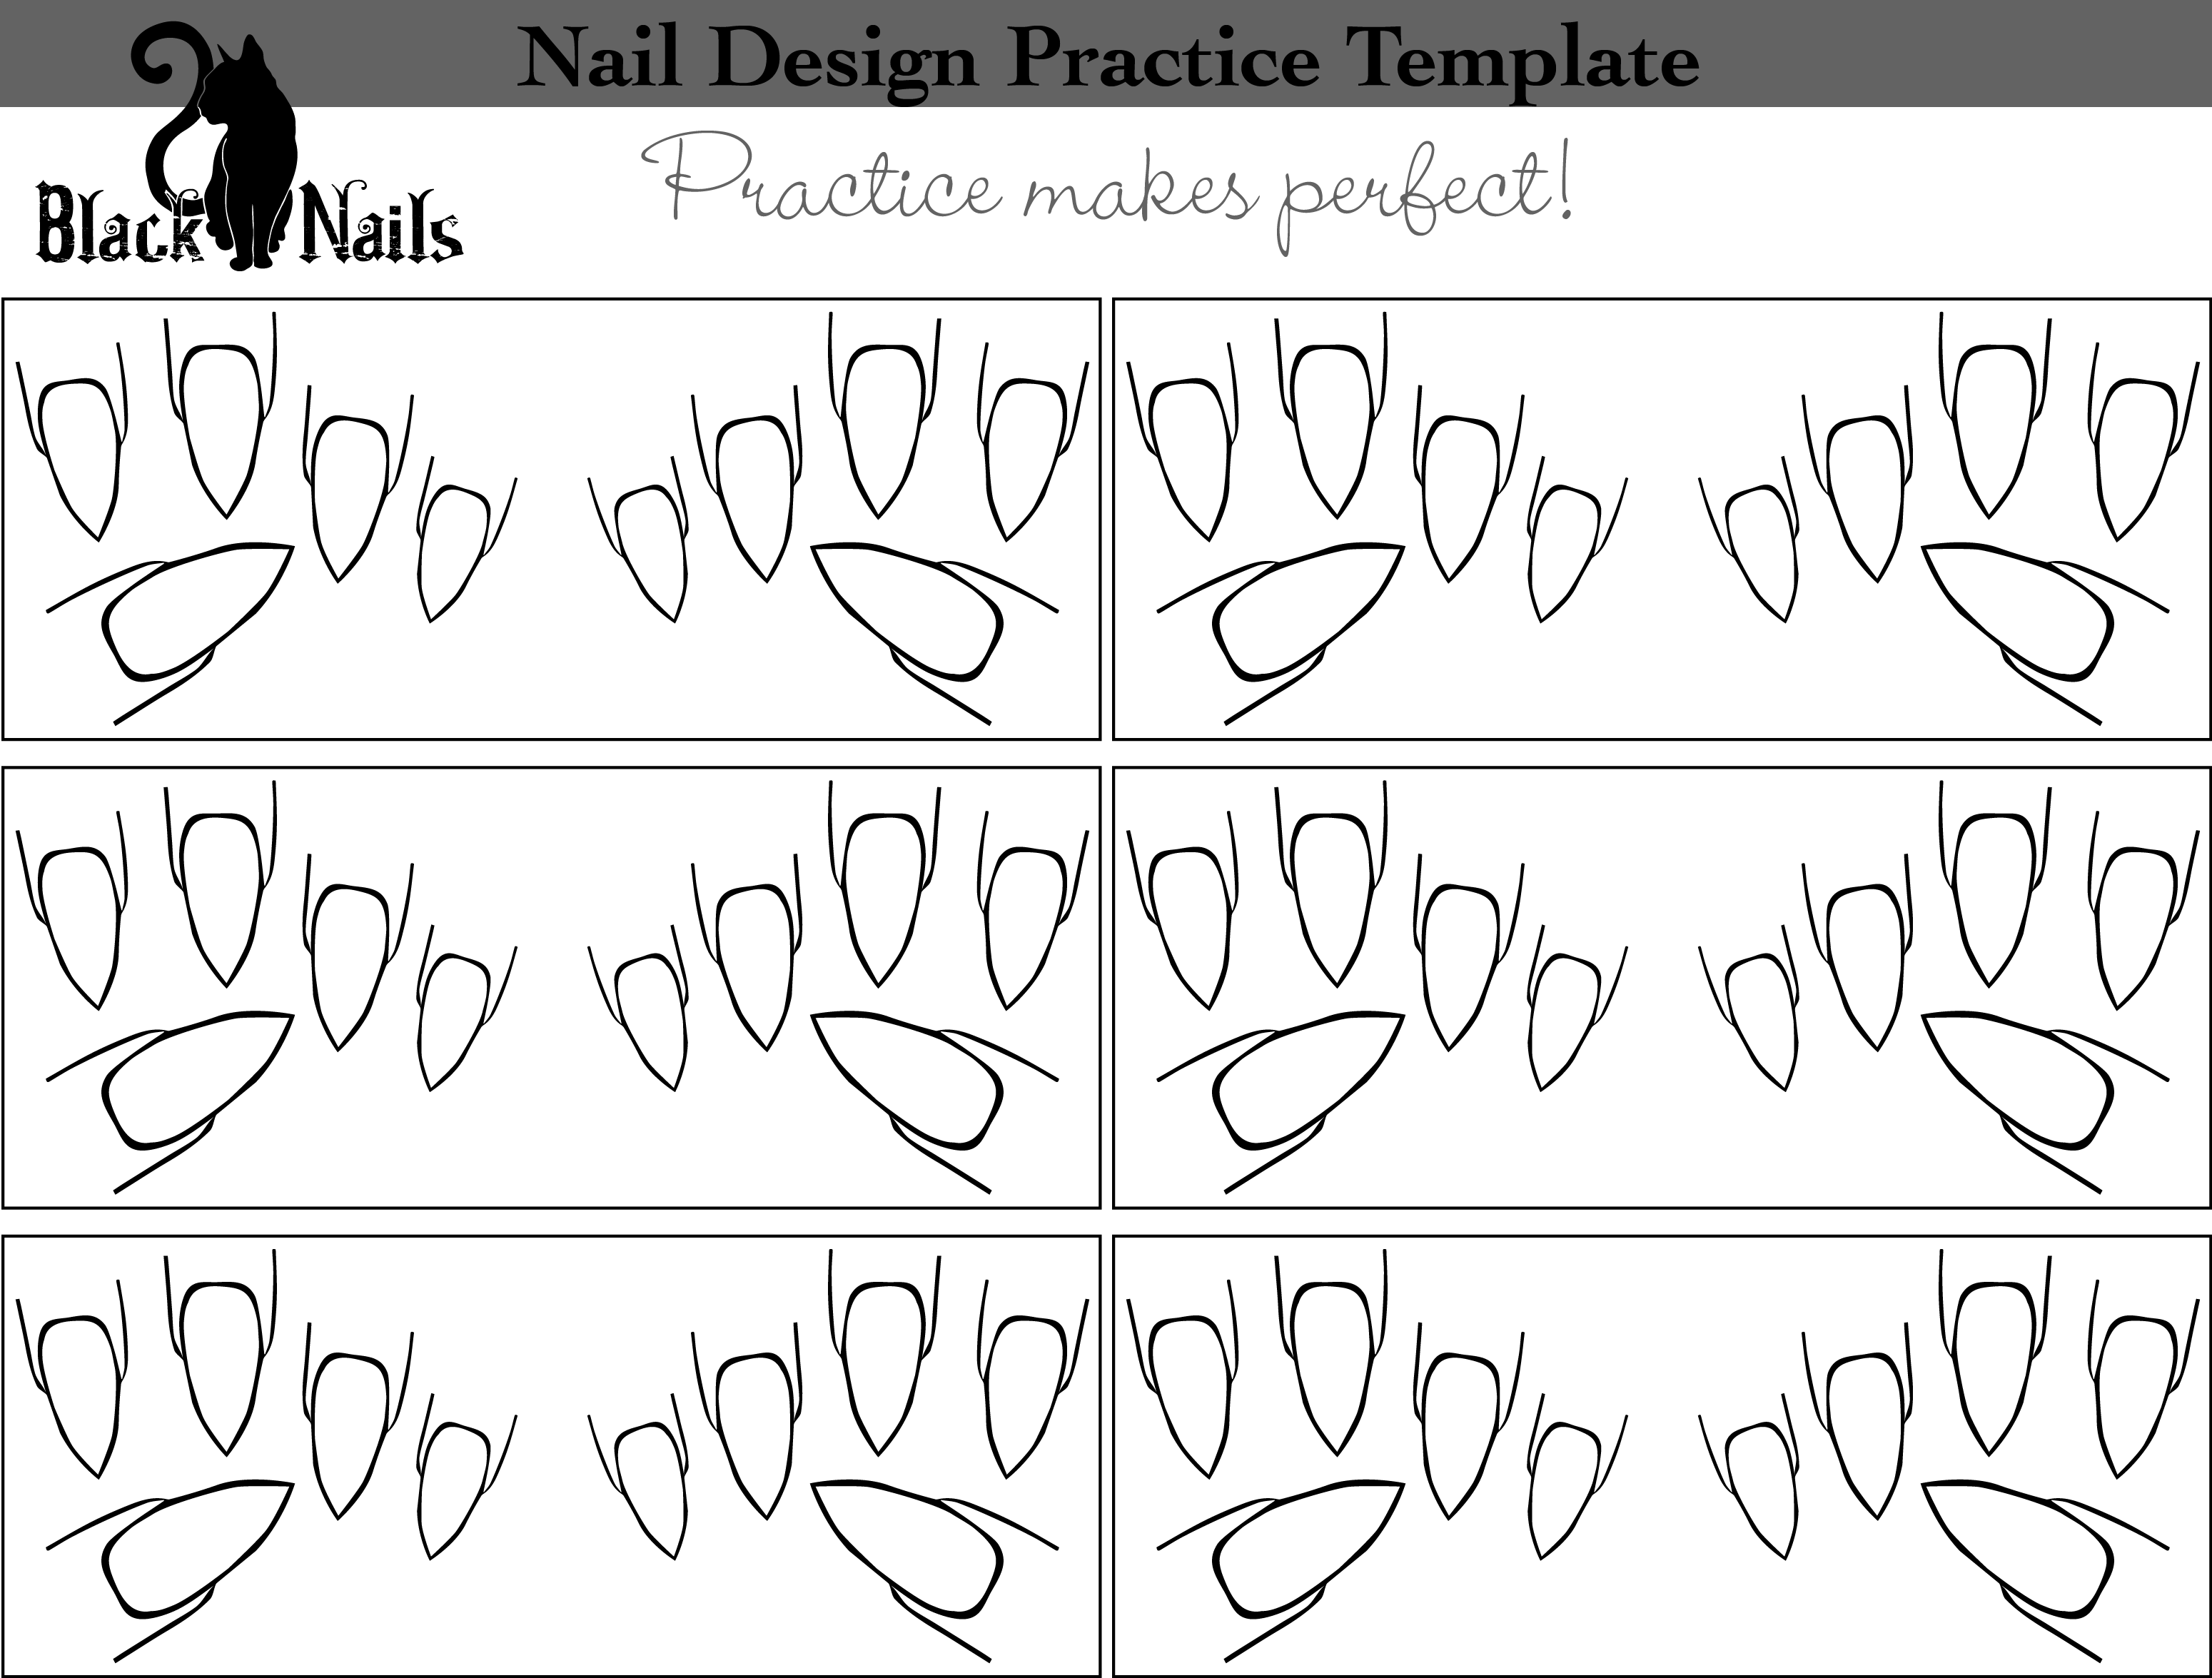 Nail Art Design Practice Templates or Sheets All Versions Black Cat